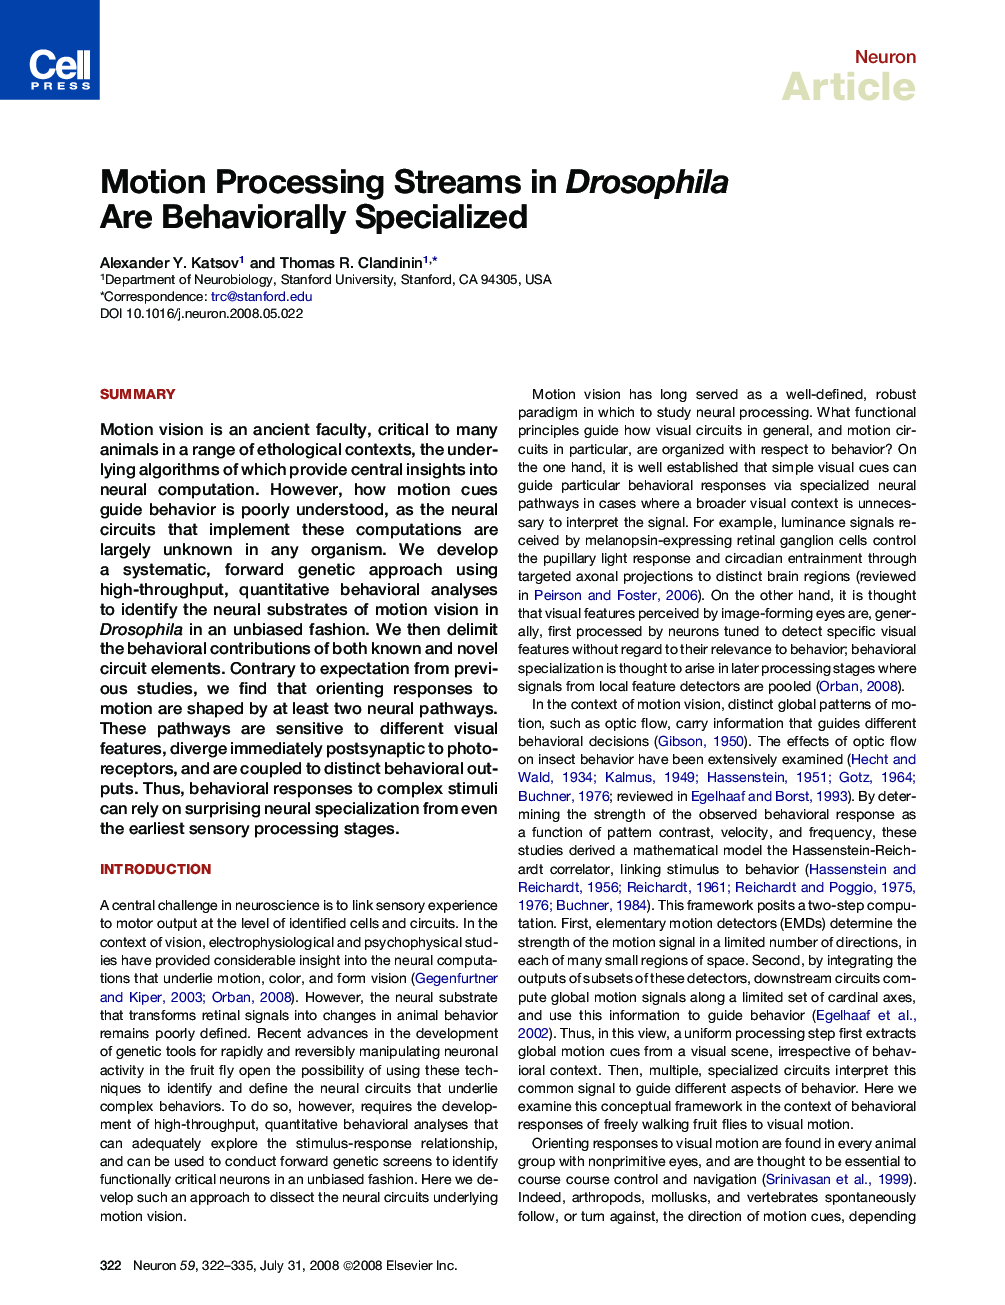 Motion Processing Streams in Drosophila Are Behaviorally Specialized